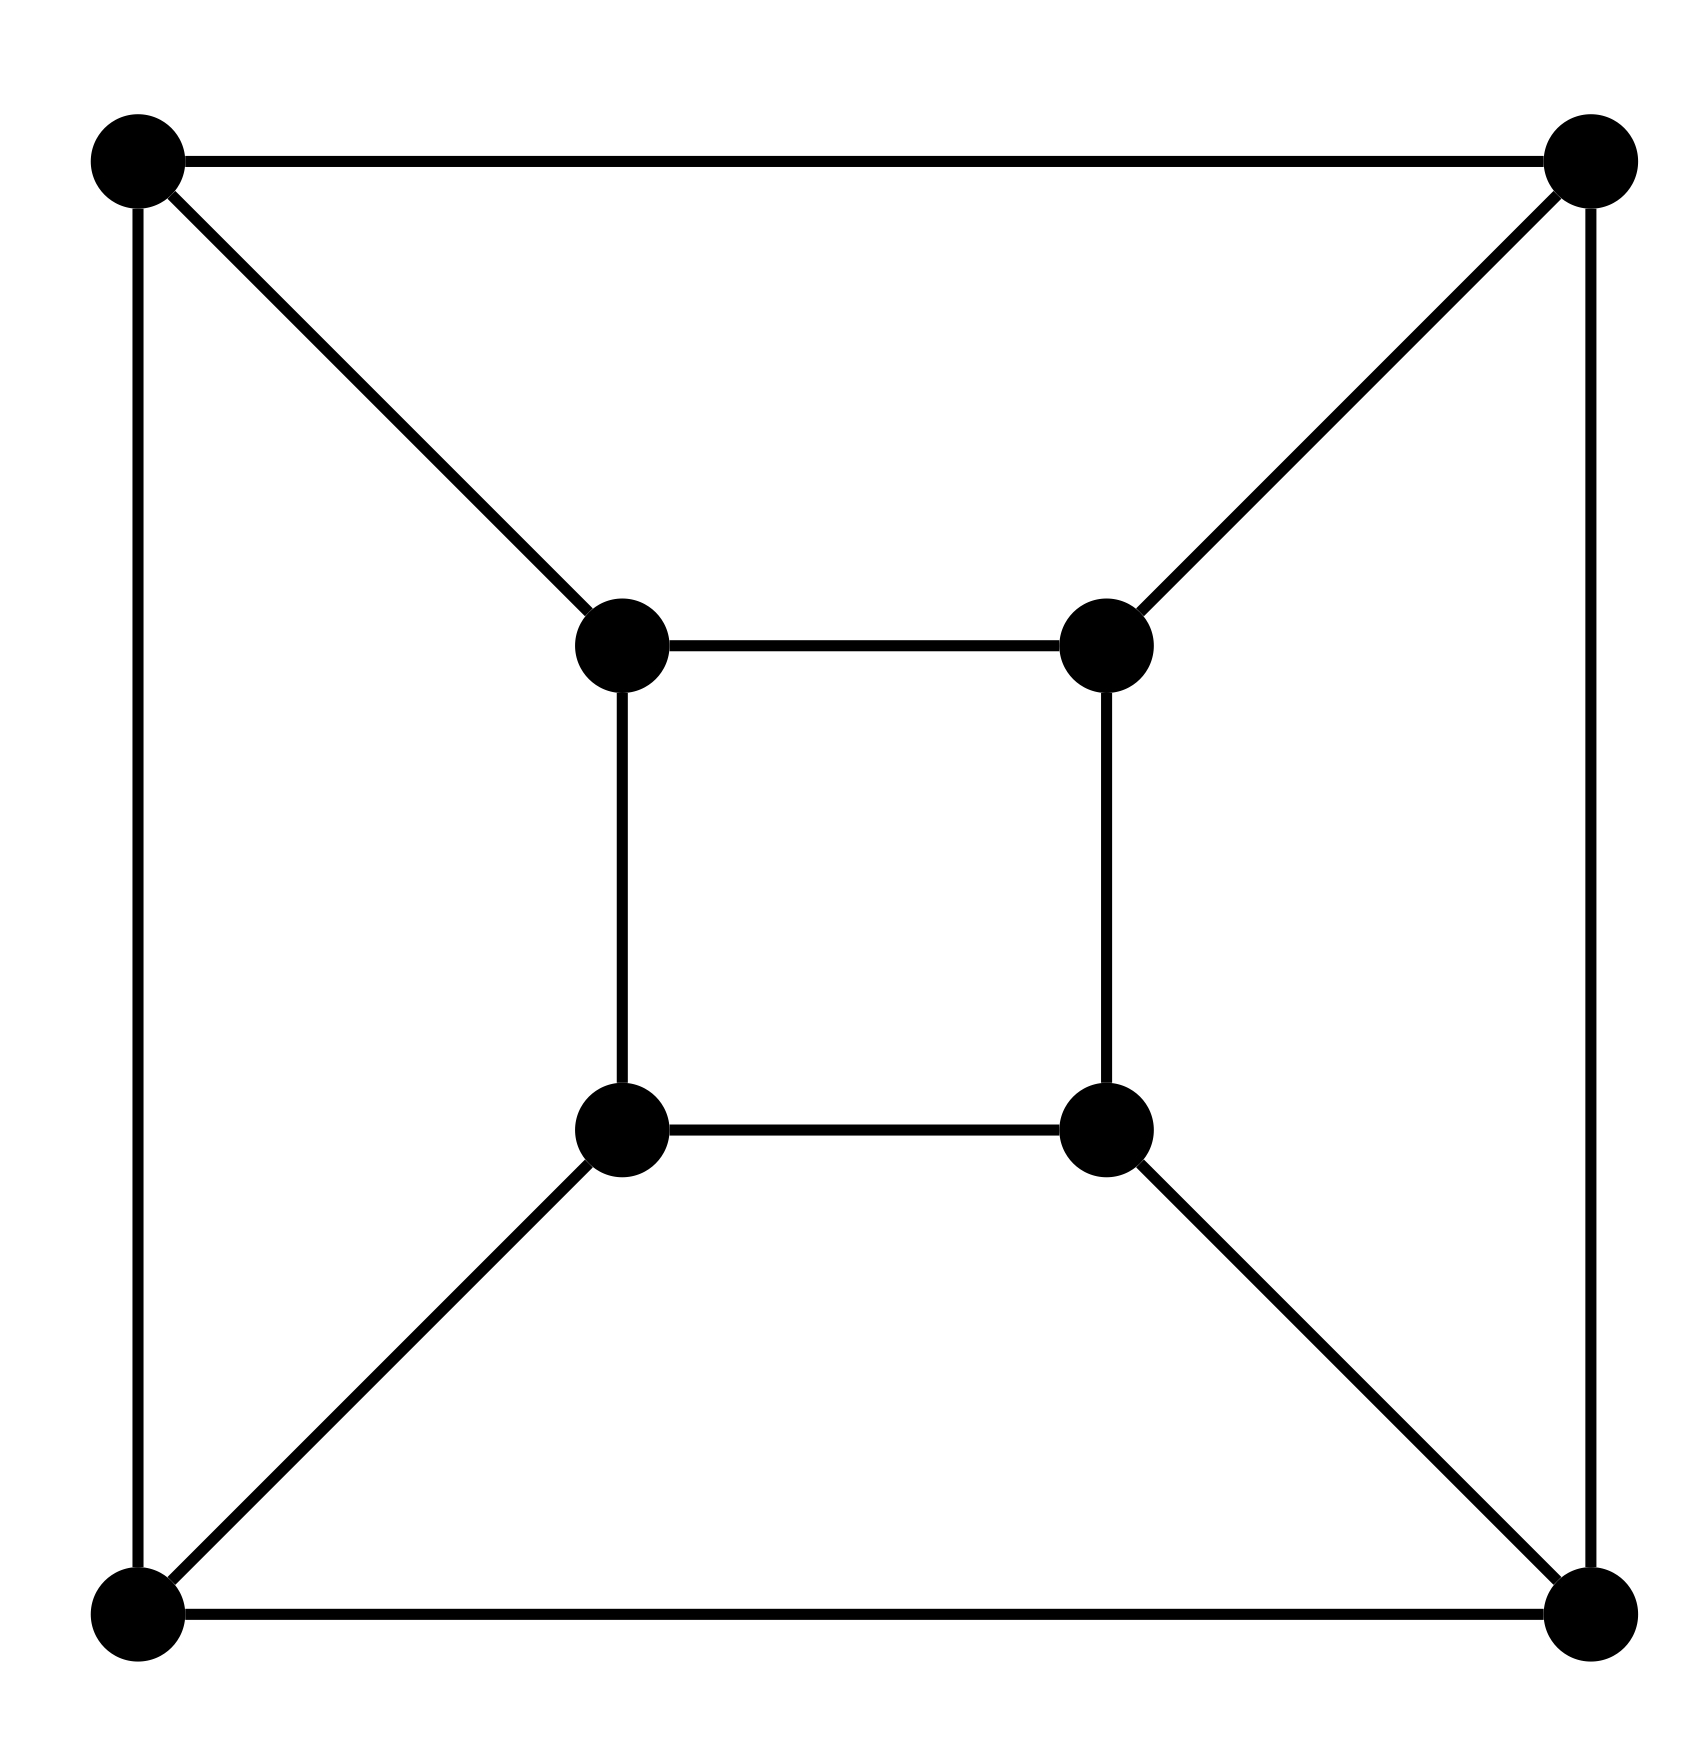 eight vertex graph. Two nested squares, with four more edges connecting inner vertices to corresponding outer vertices.